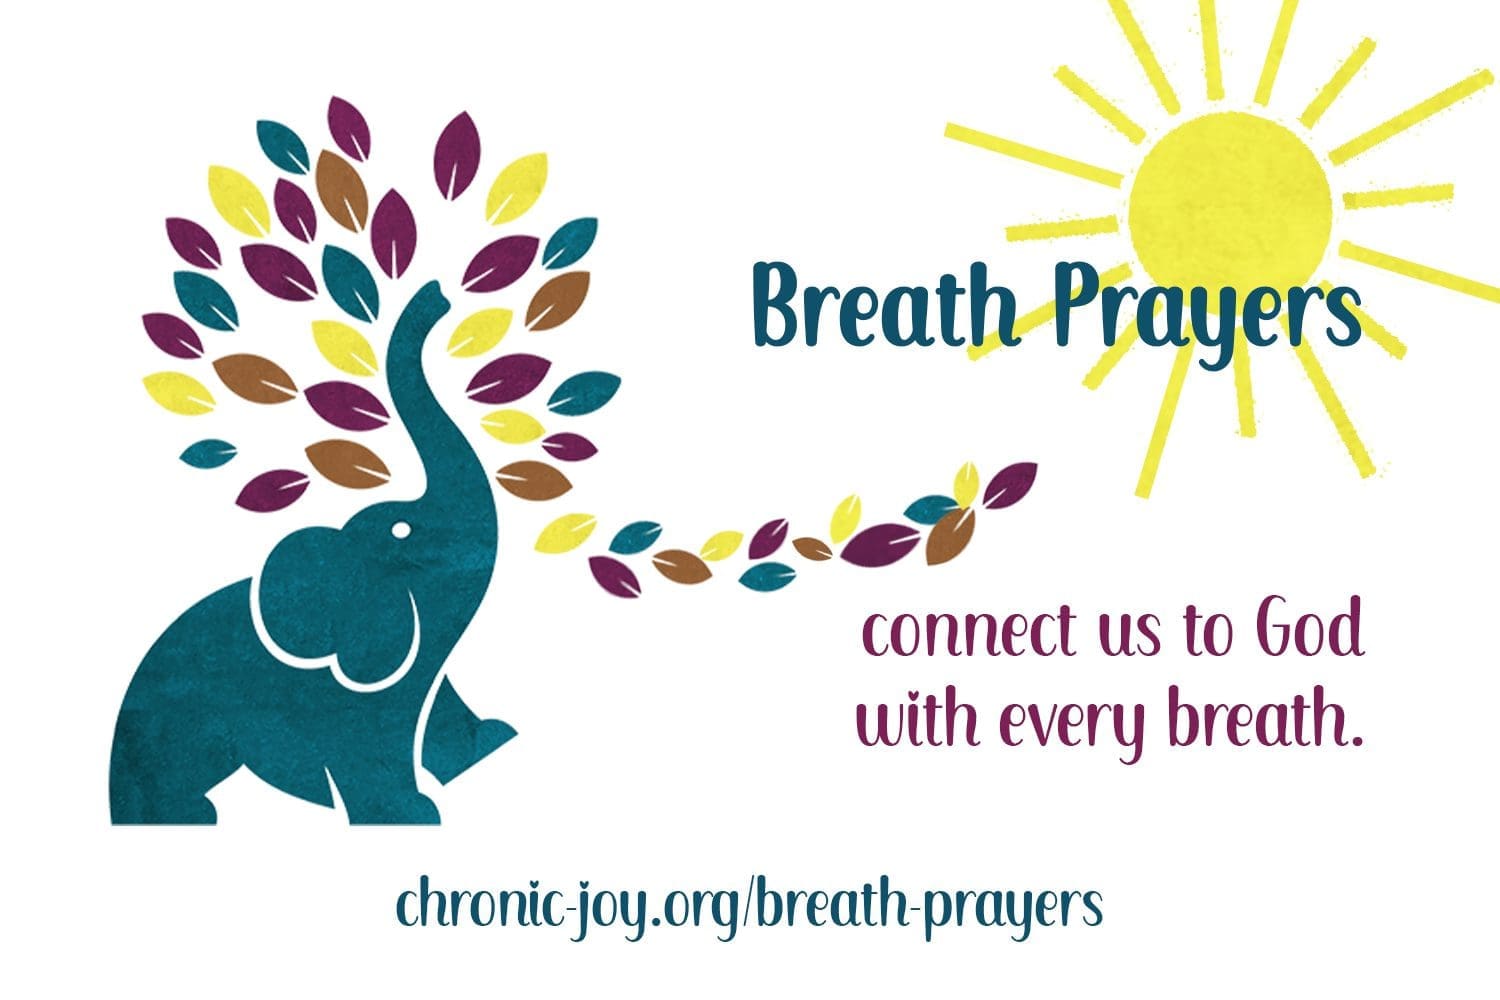 Breath Prayers connect us to God with every breath.